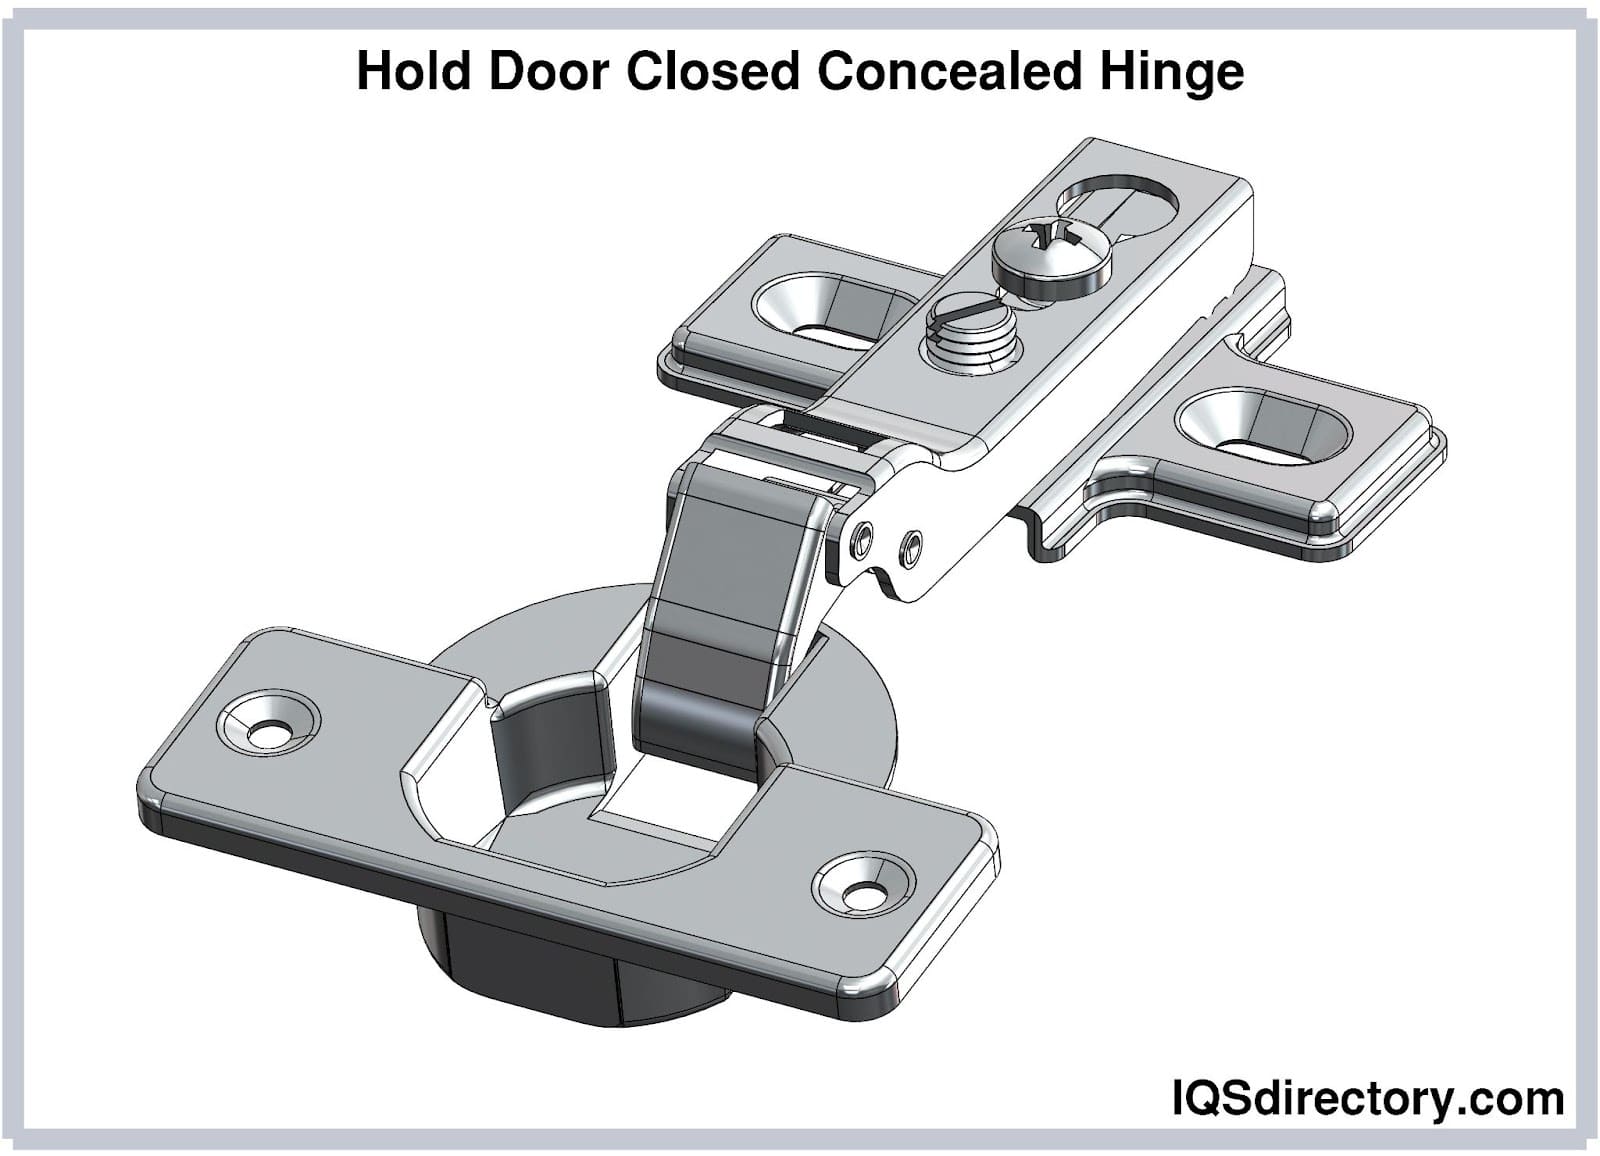 Hold Door Closed Concealed Hinge